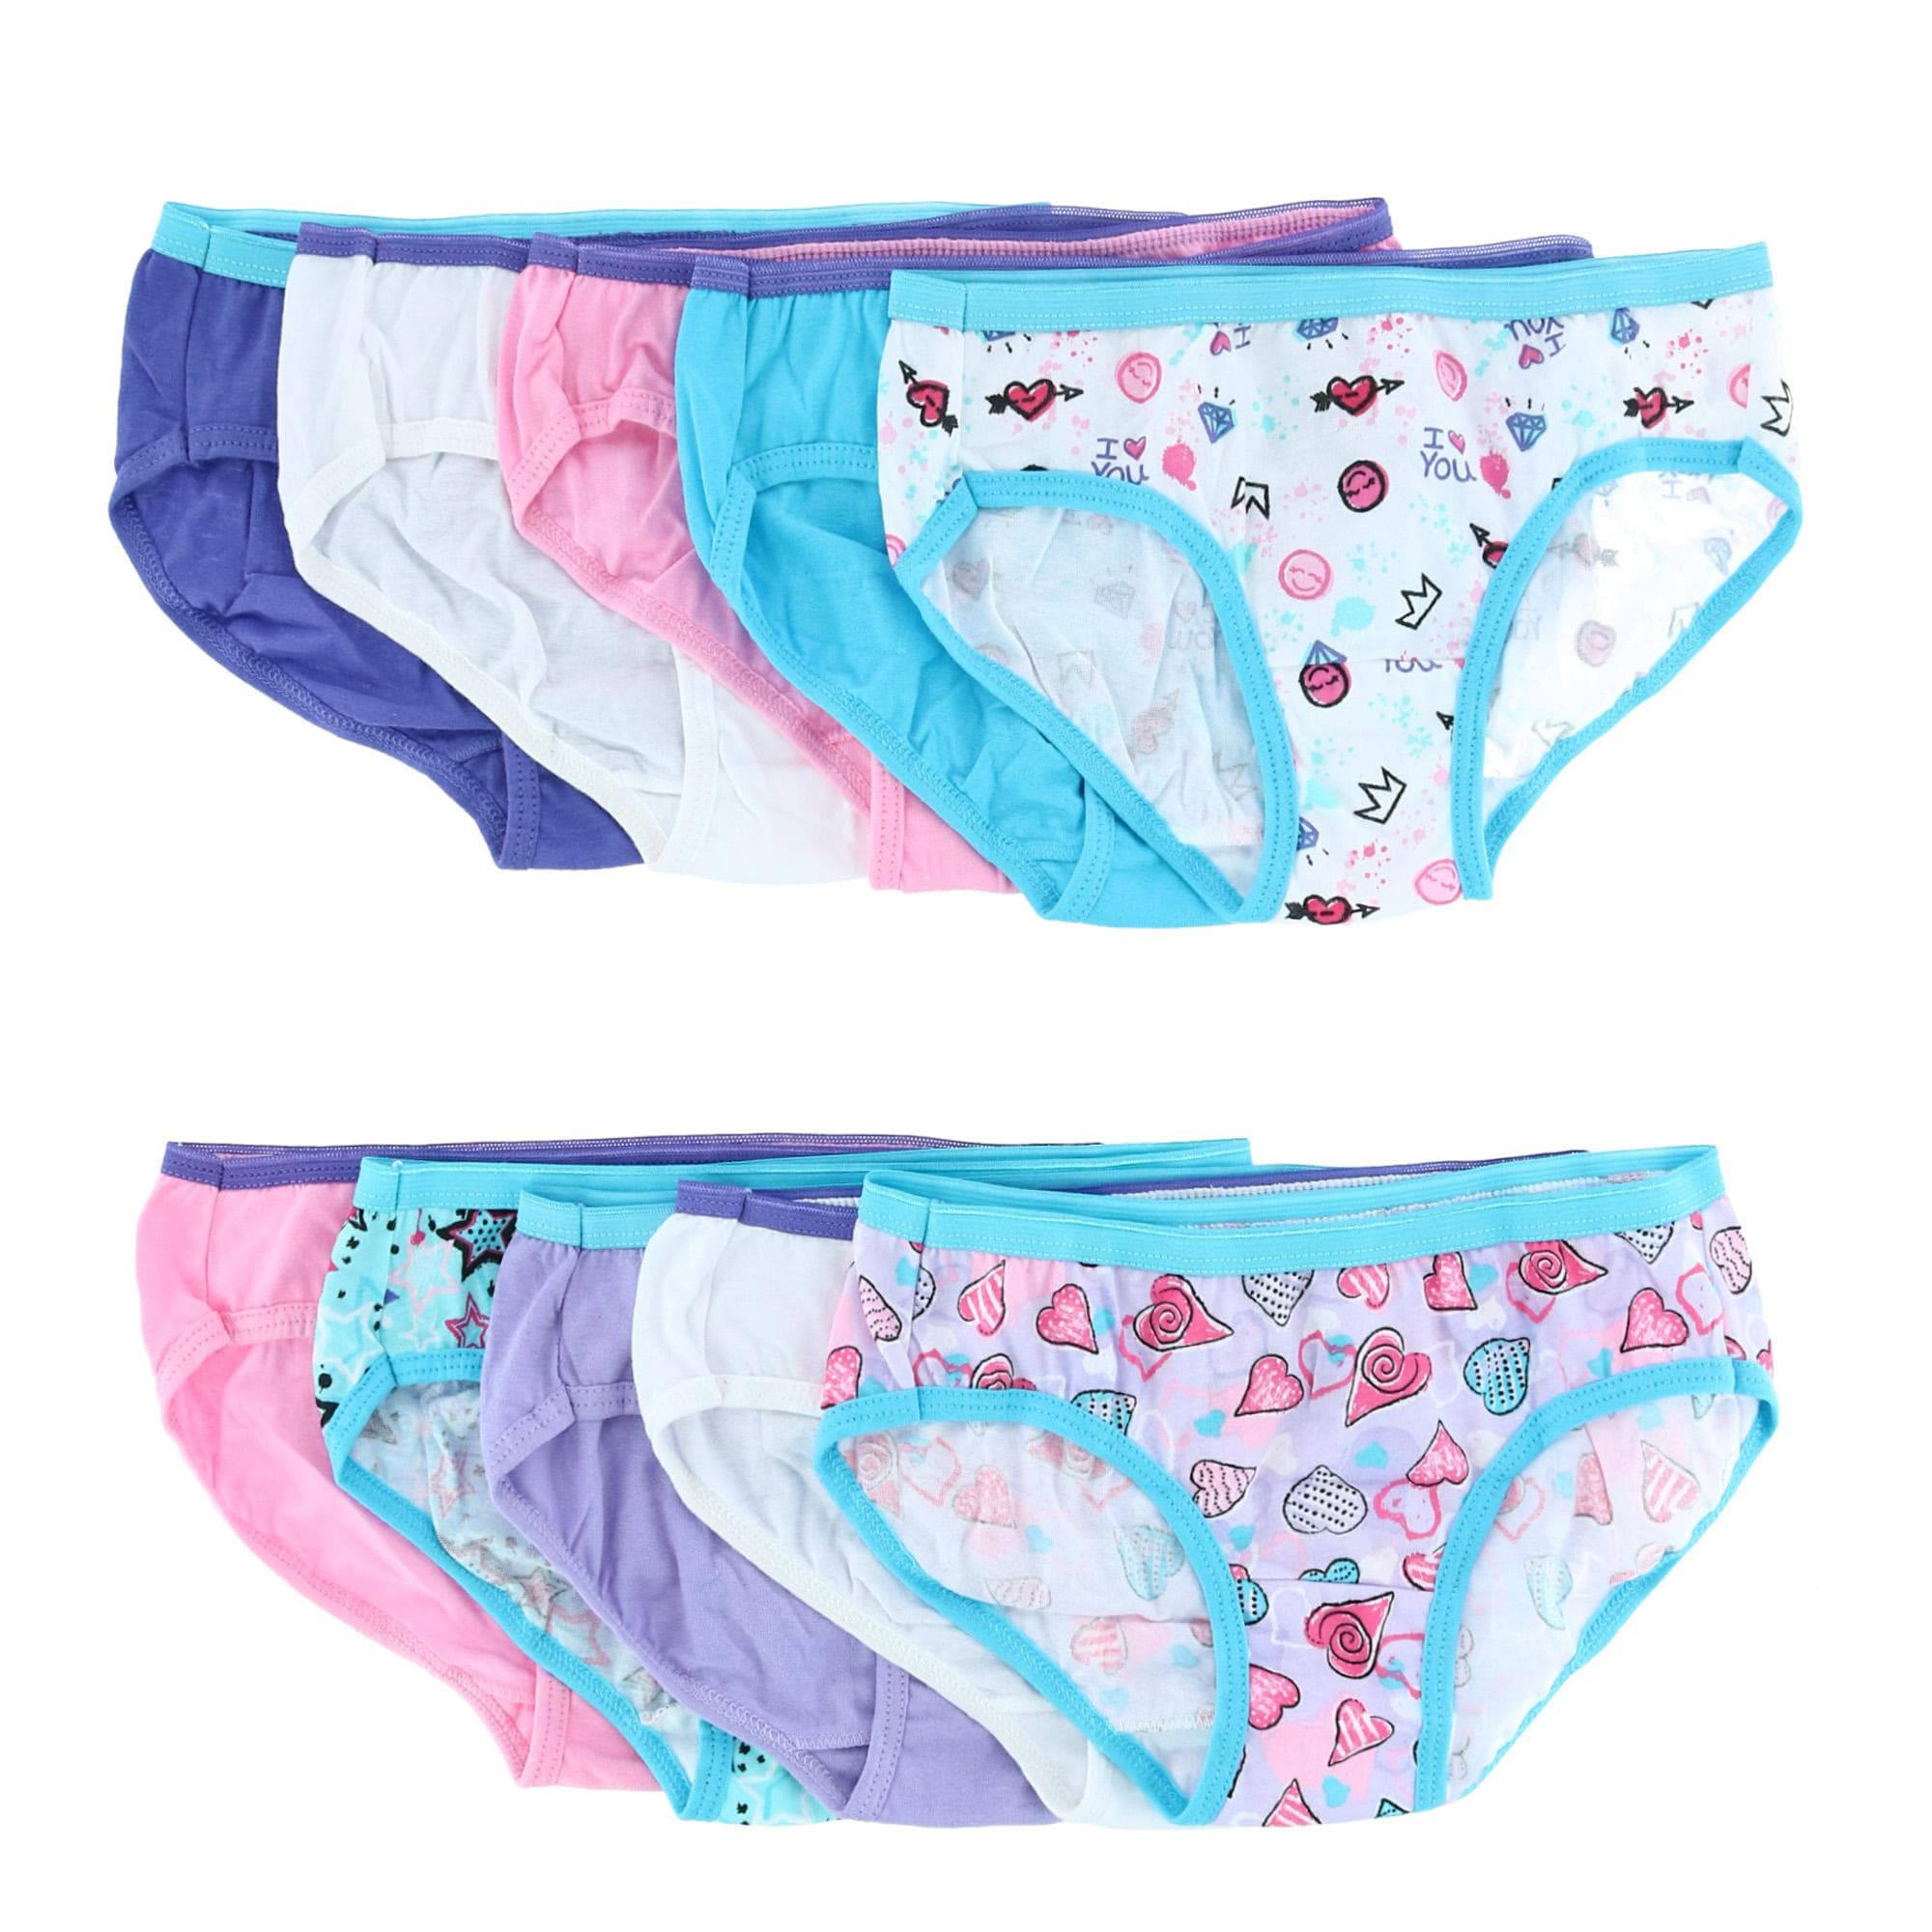 Girl's 10-Pack Assorted Cotton Hipster Underwear by Hanes